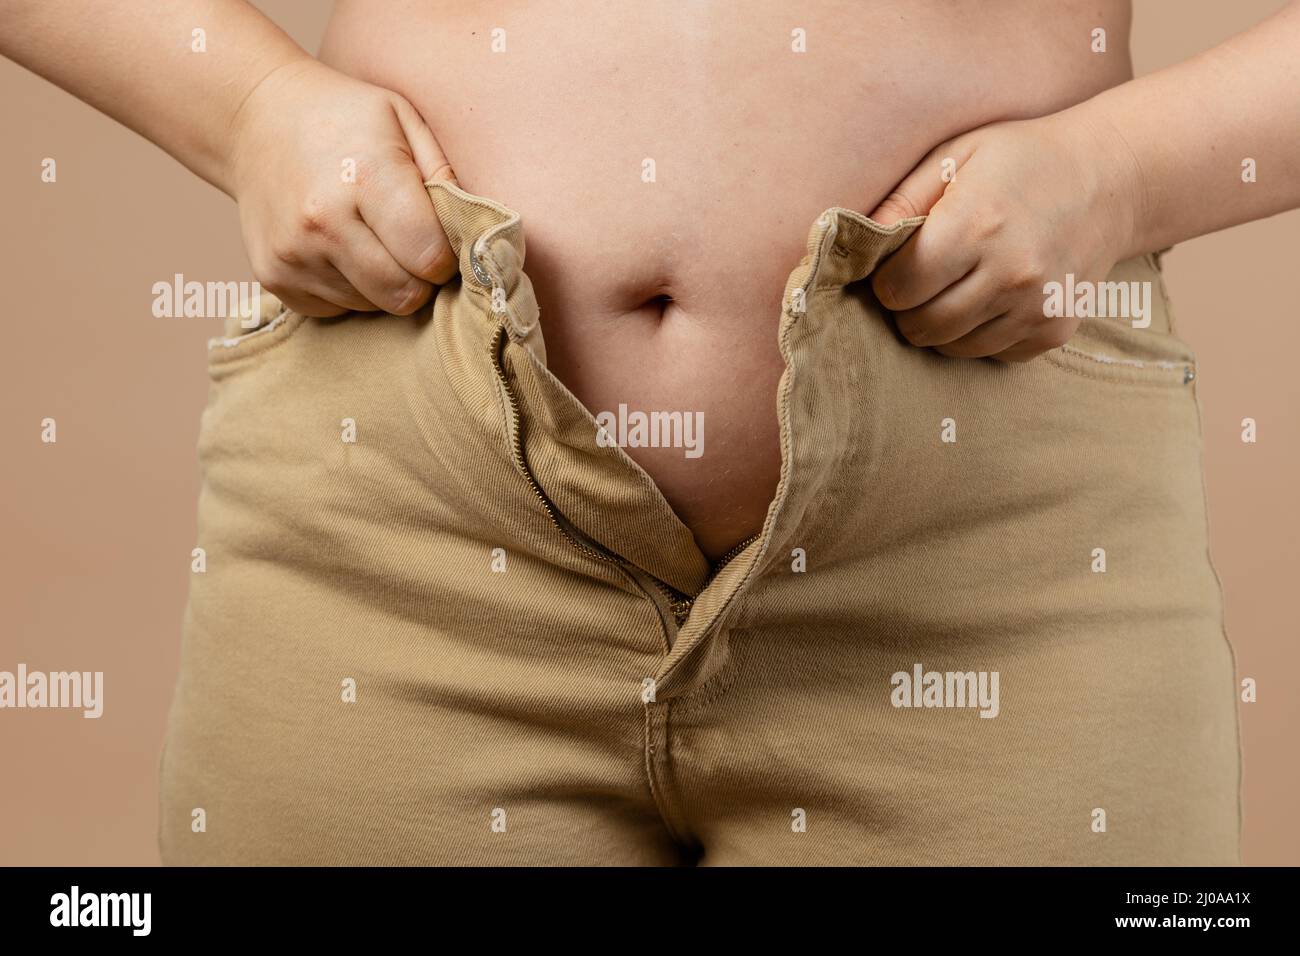 Female flabby big tummy preventing her from putting jeans on on beige background. Visceral fat. Body positive. Sudden weight gain. Tight little Stock Photo